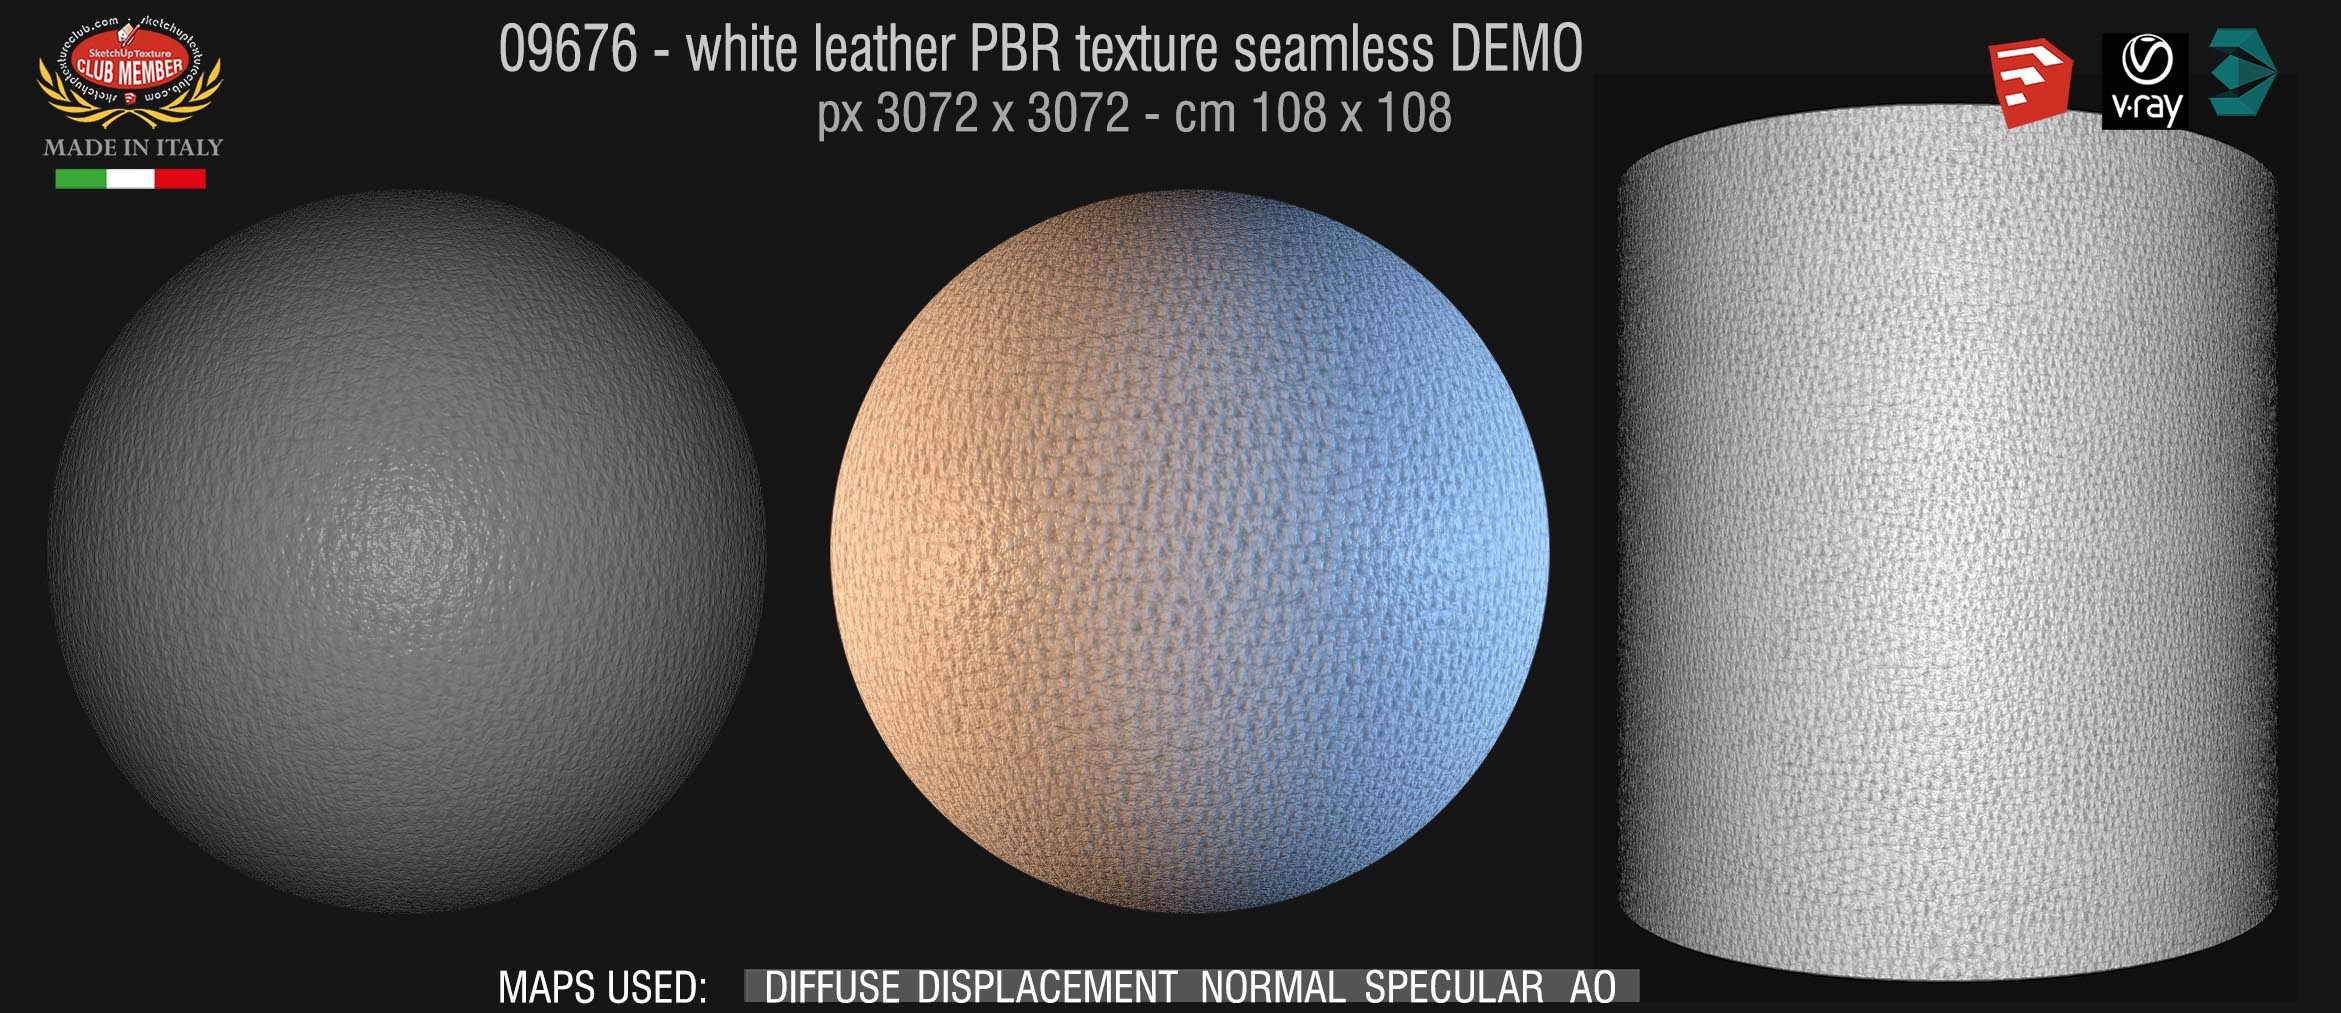 08676 white leather PBR texture seamless DEMO